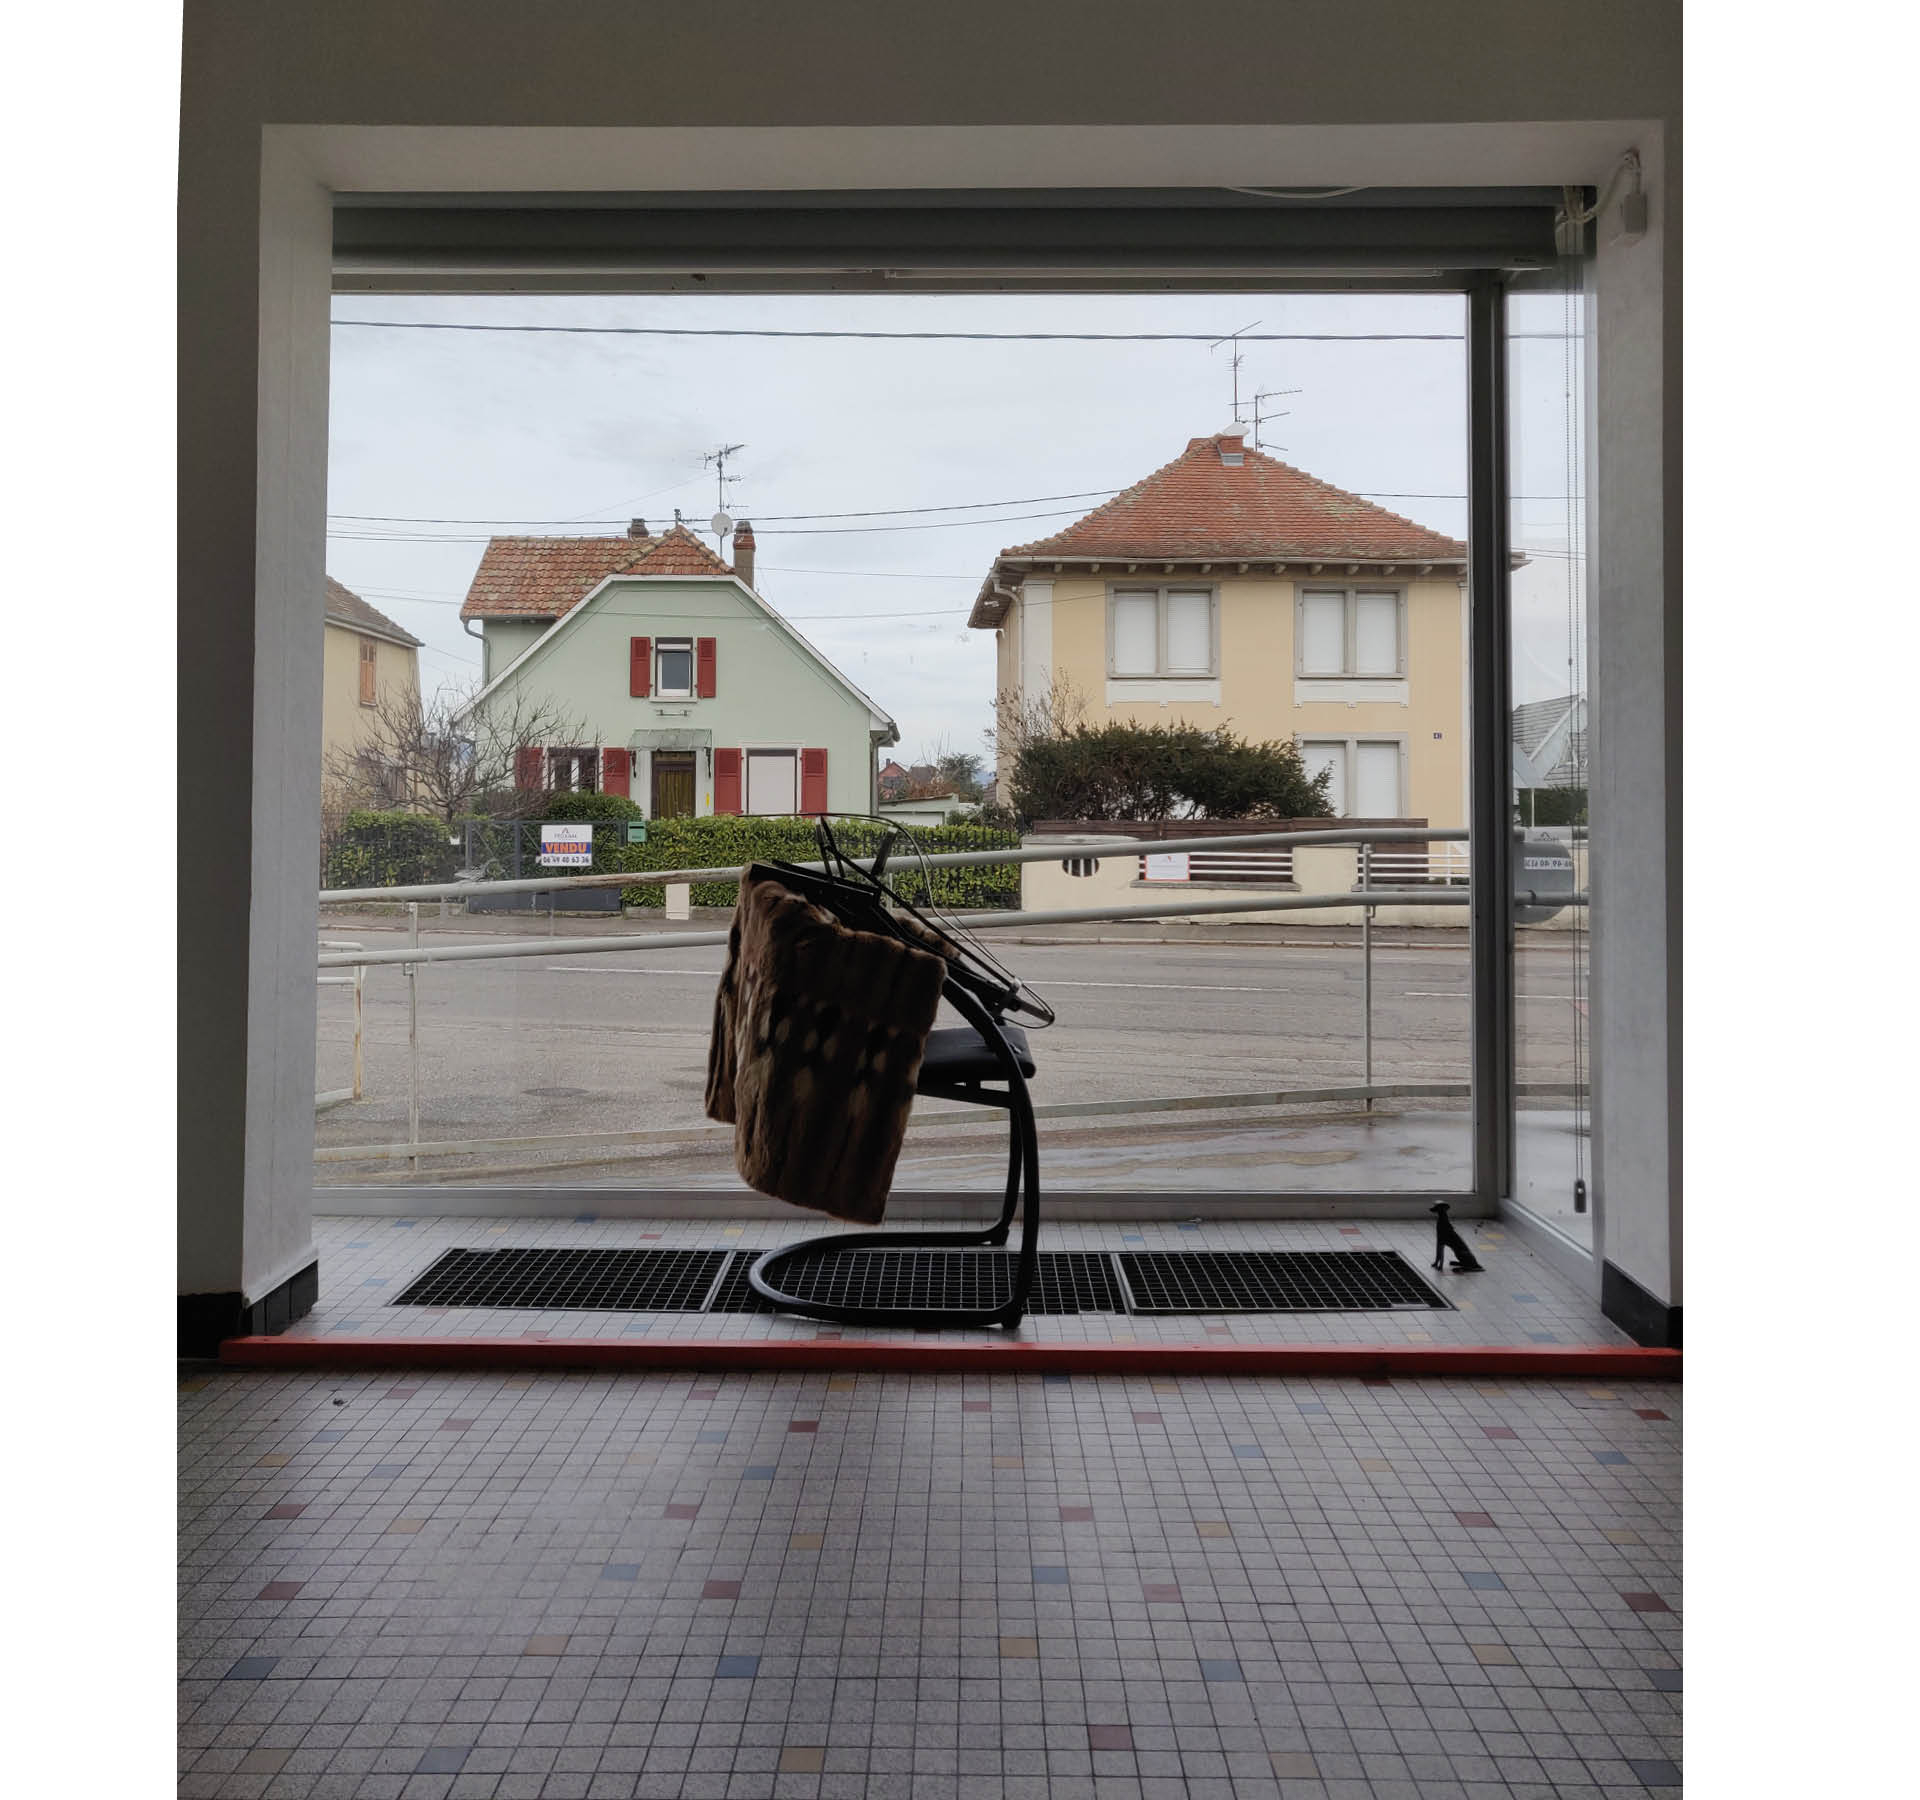 47 route de Colmar. Stills of a performed installation. France, February 2021. Waiting room chair, fur, welded dog head, greyhound statue.  